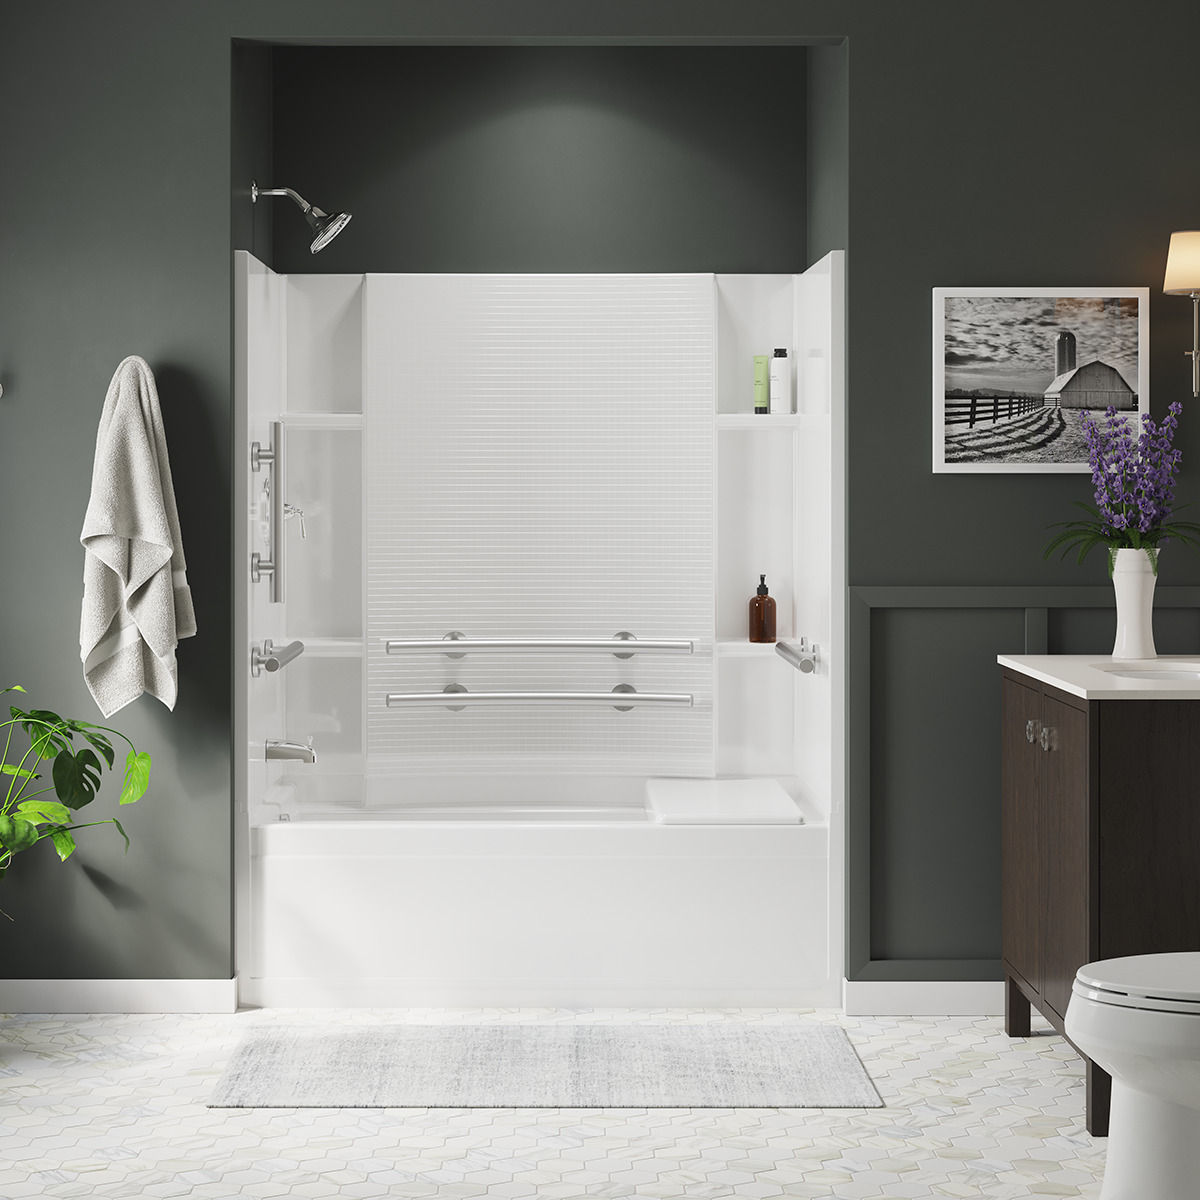 A white bathtub with white walls on which two parallel grab bars are installed.